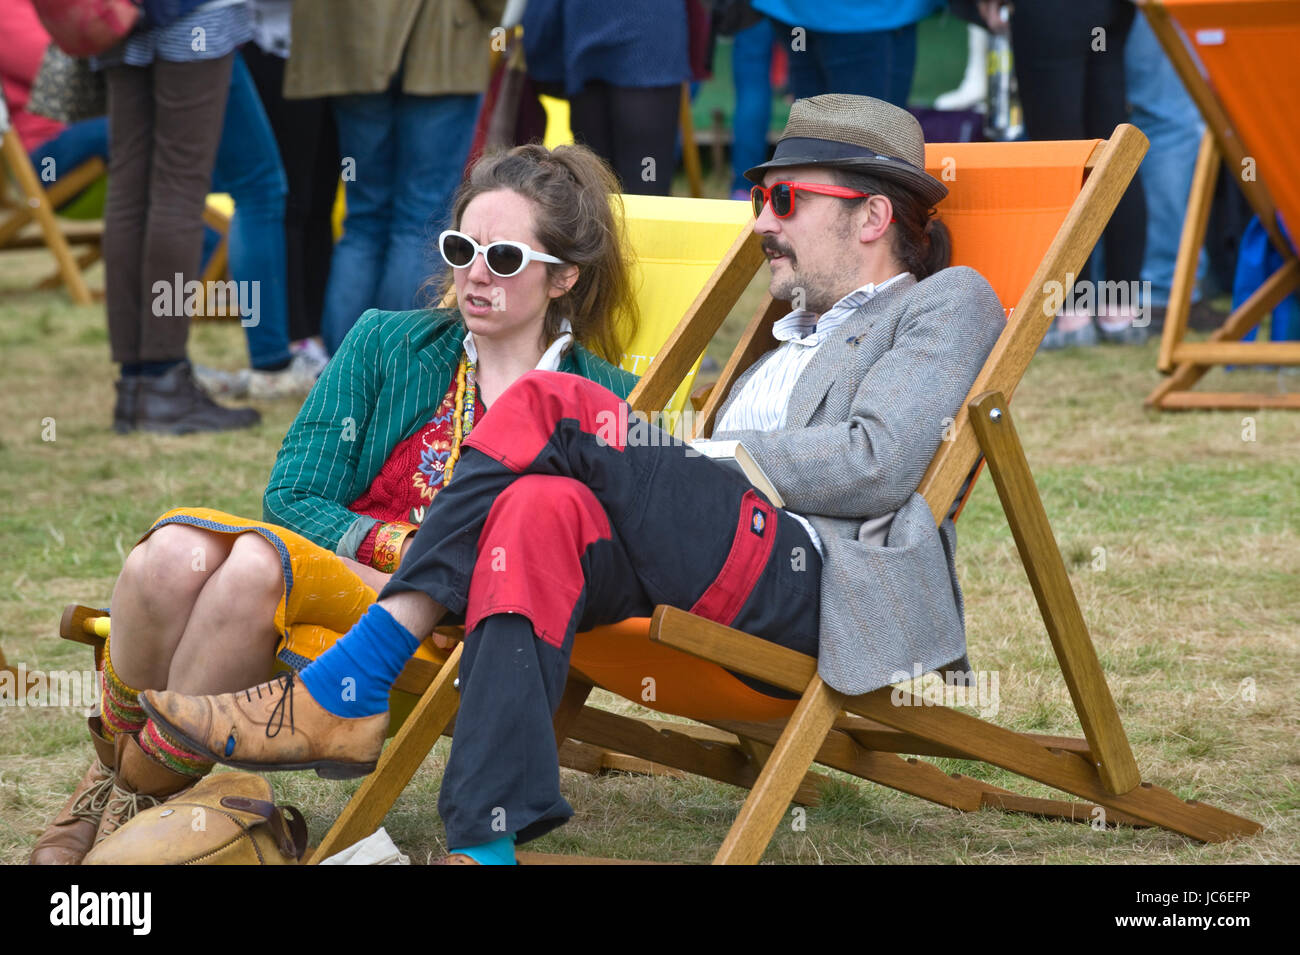 Man & woman relaxing in deckchairs at Hay Festival of Literature and the Arts 2017 Hay-on-Wye Powys Wales UK Stock Photo